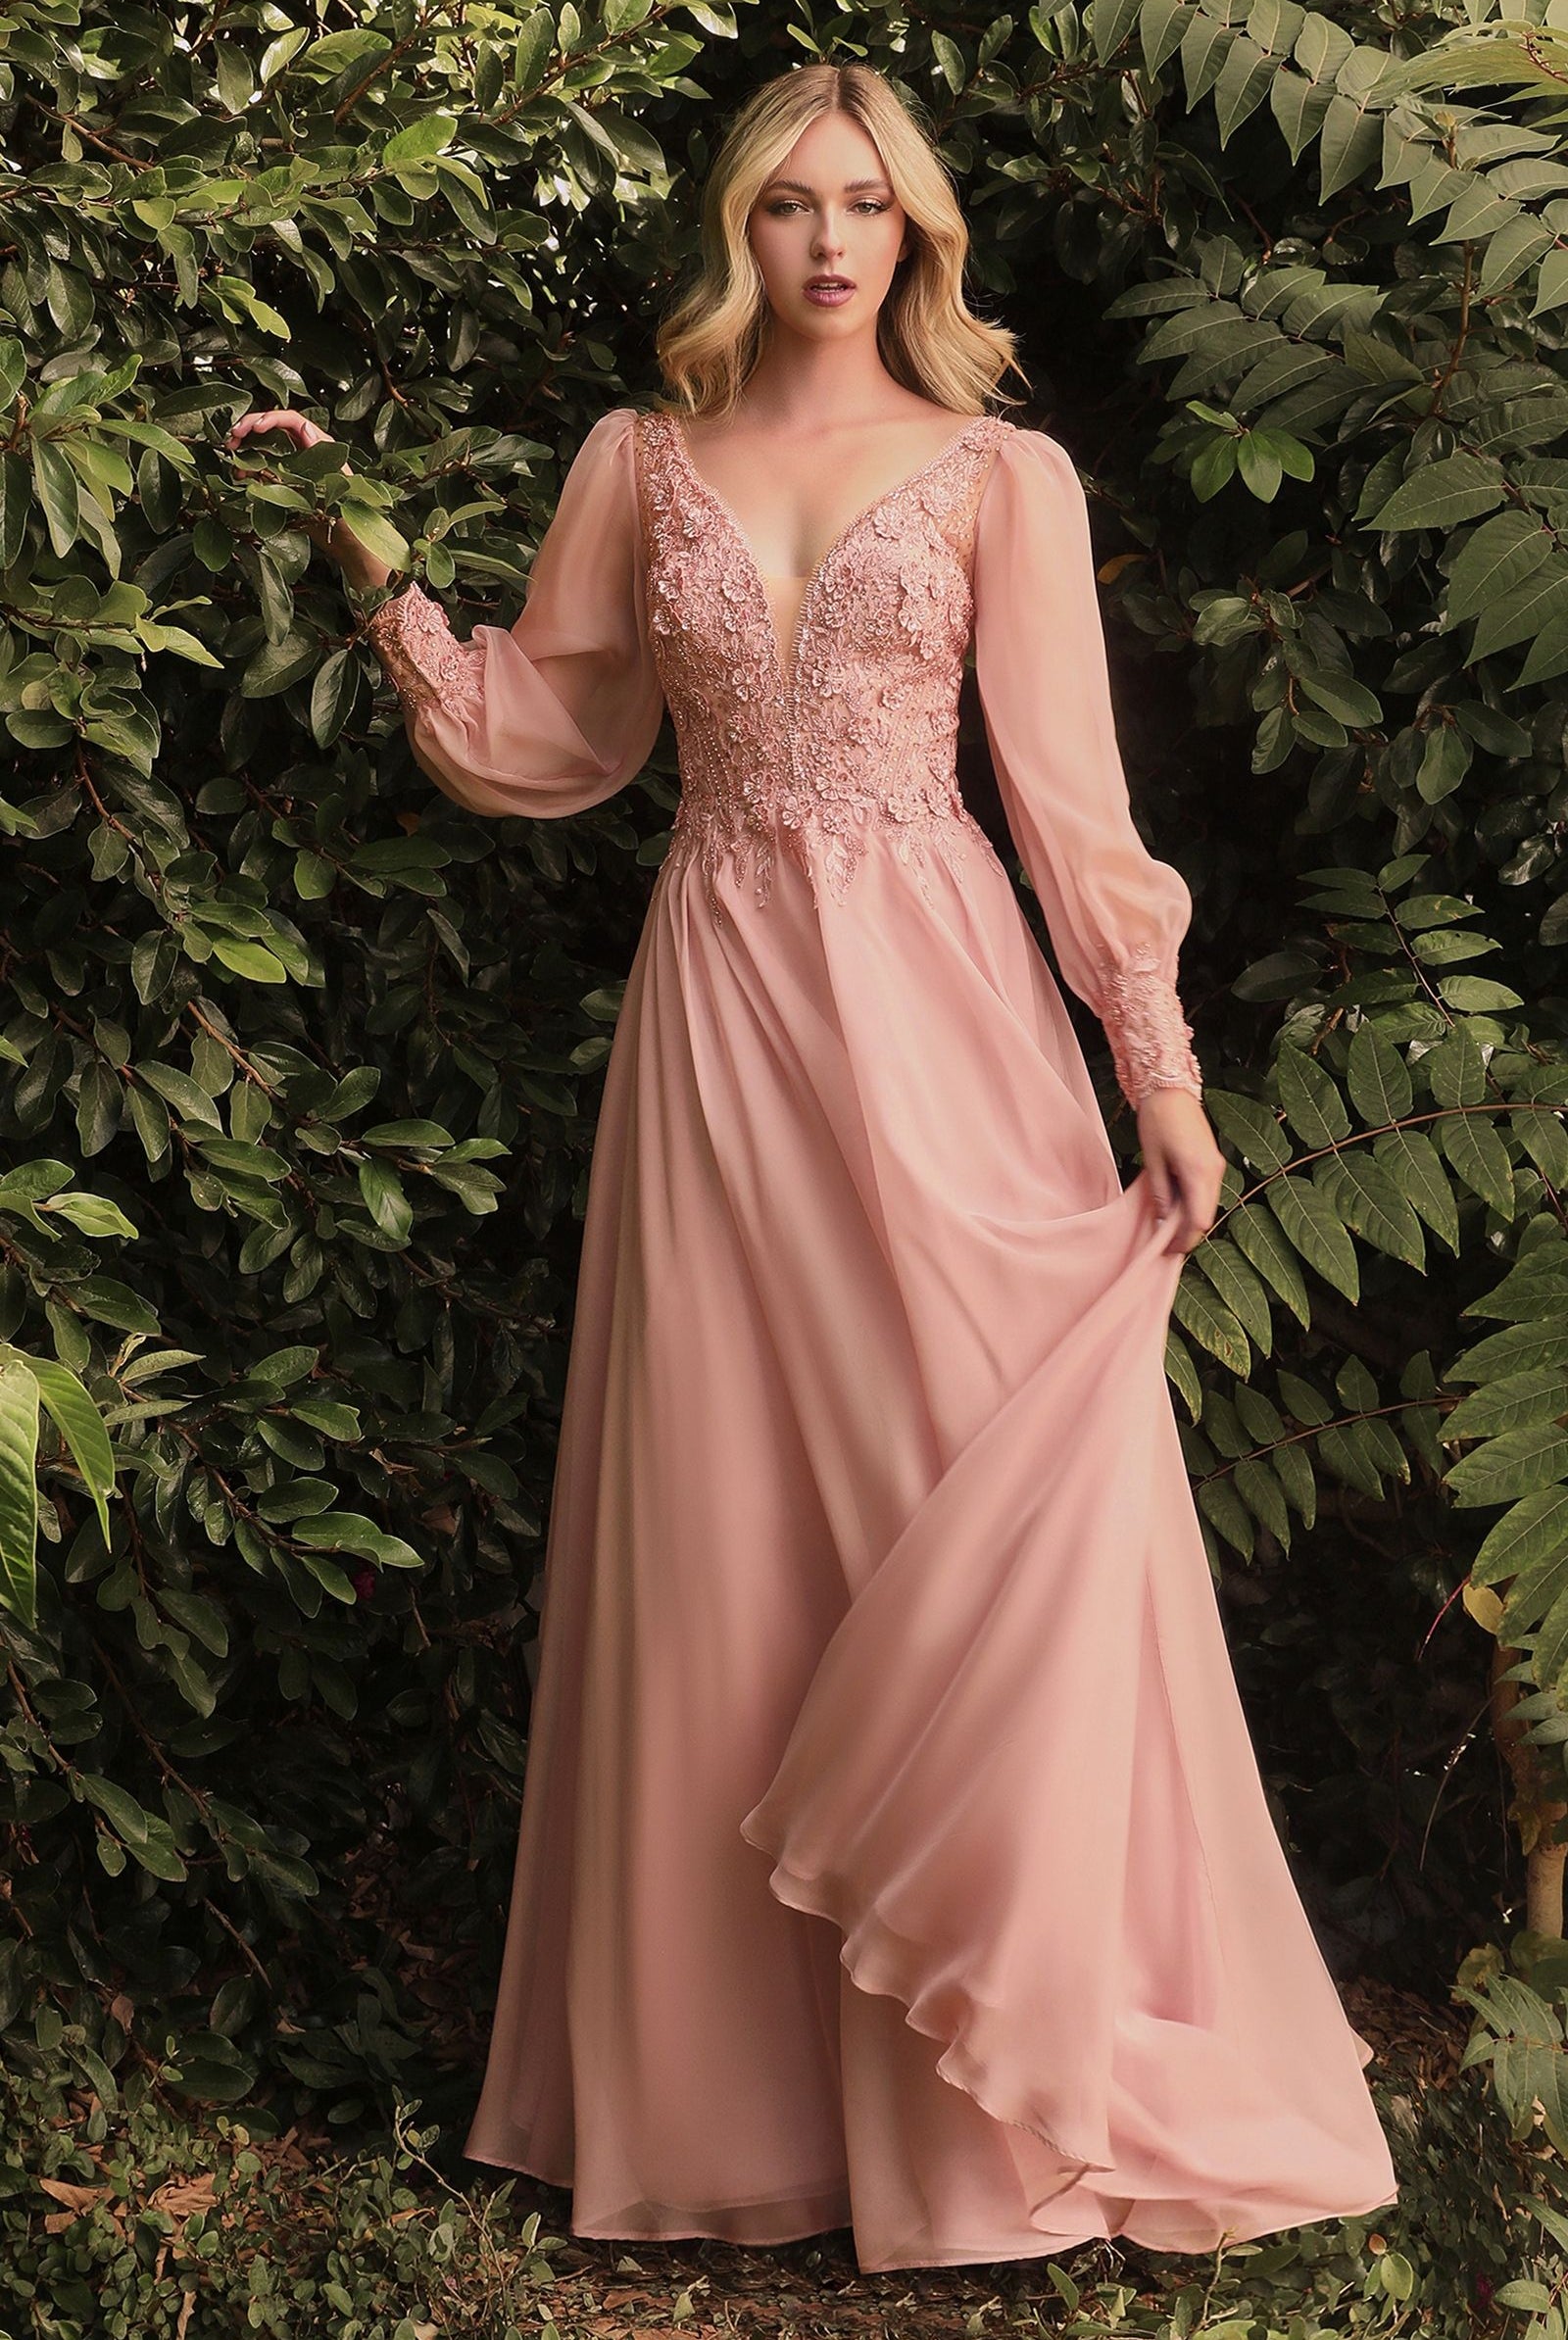 Elegant Long Puff Sleeves A-Line Chiffon Embellished V-Neck Bodice Sensual Open Back Evening & Prom Gown CDCD0183 Sale-Mother of the Bride Dress-smcfashion.com